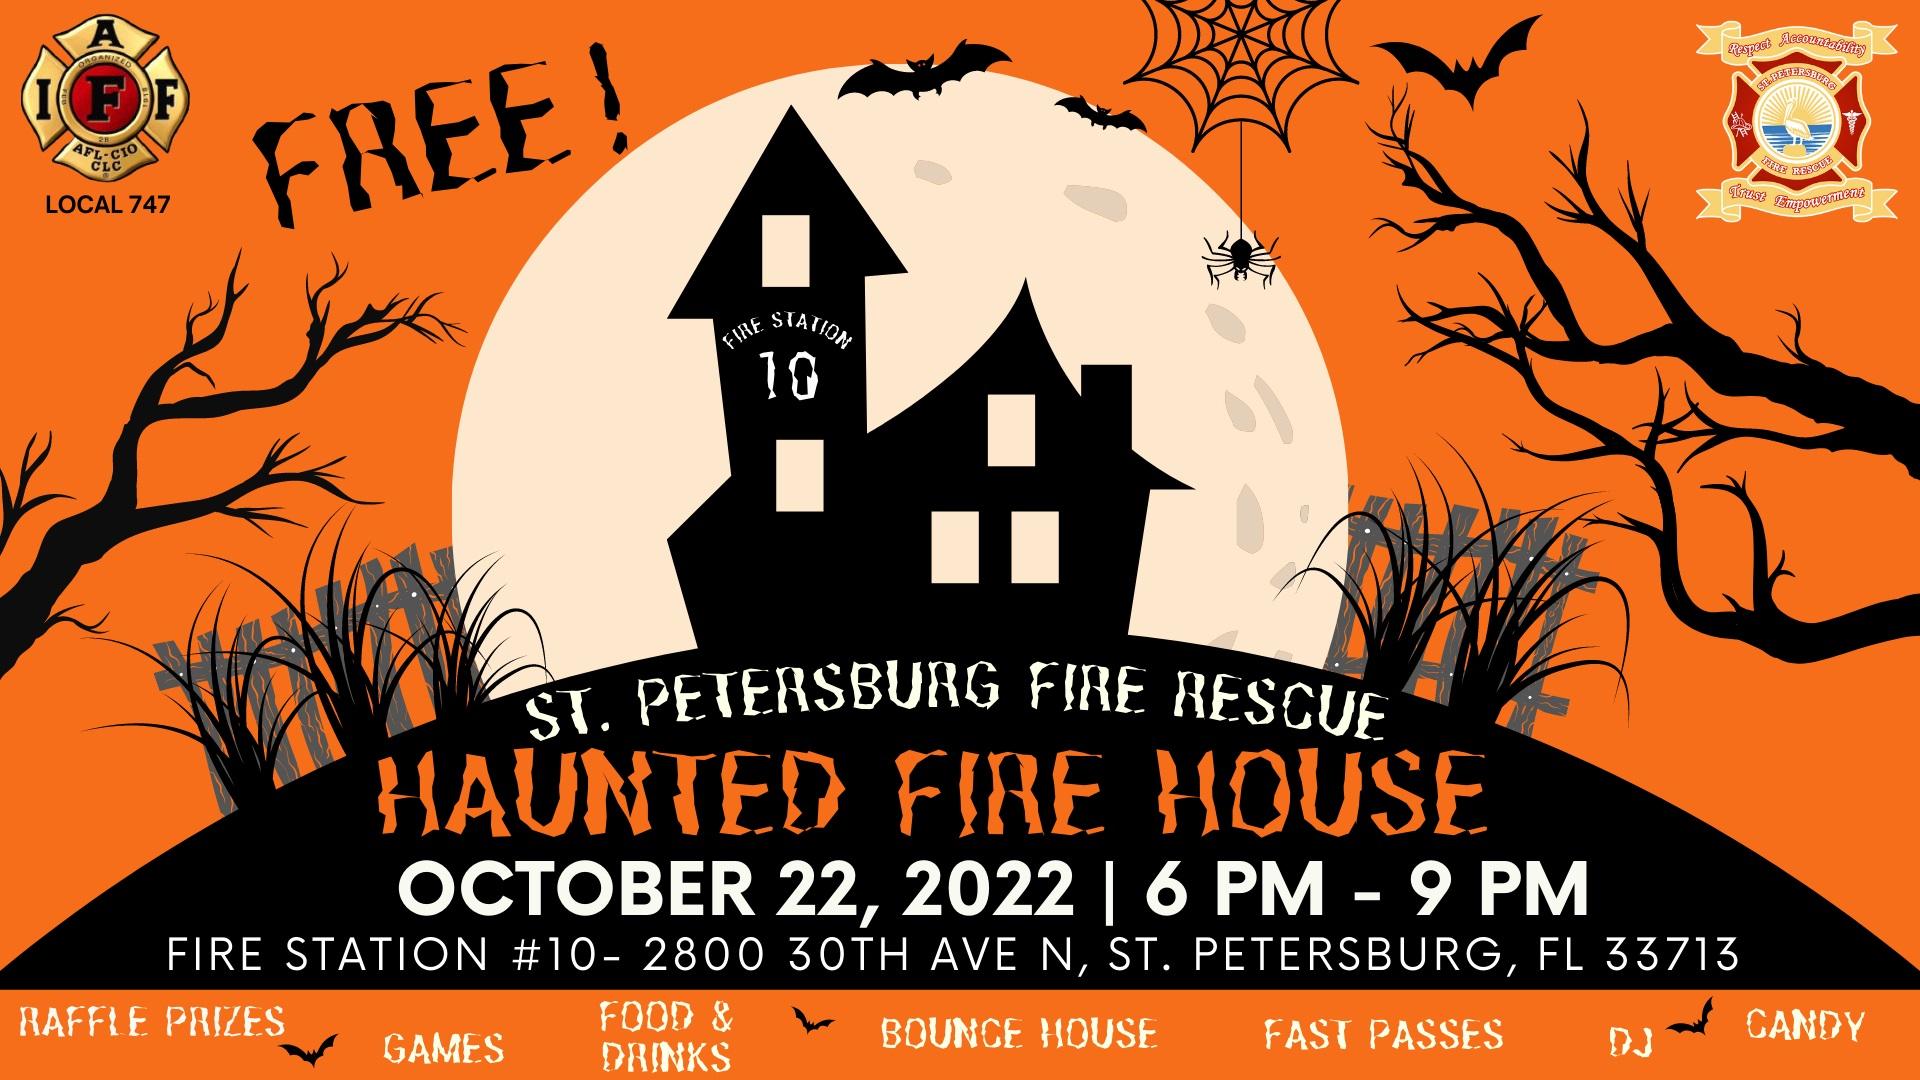 St. Petersburg Fire Rescue Haunted Fire House
Sat Oct 22, 6:00 PM - Sat Oct 22, 9:00 PM
in 3 days